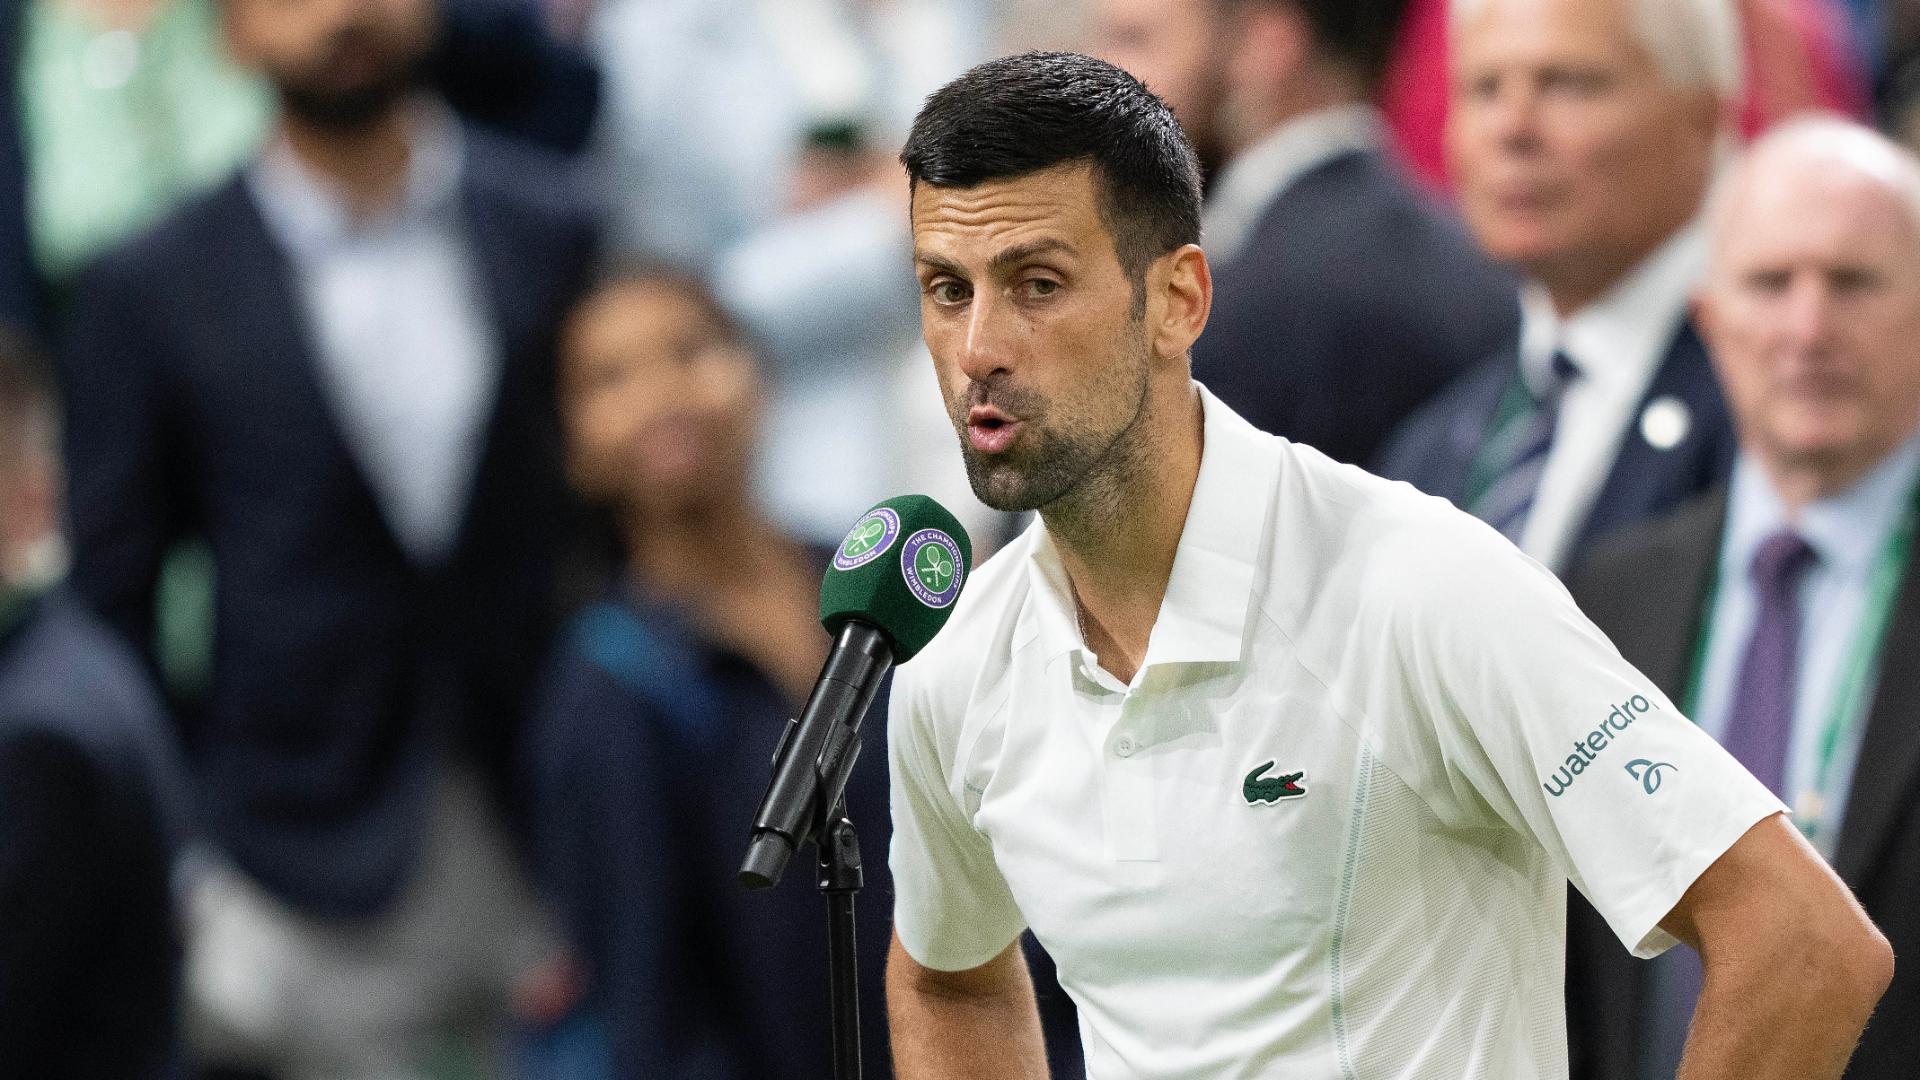 Djokovic has some words for fans he considers disrespectful